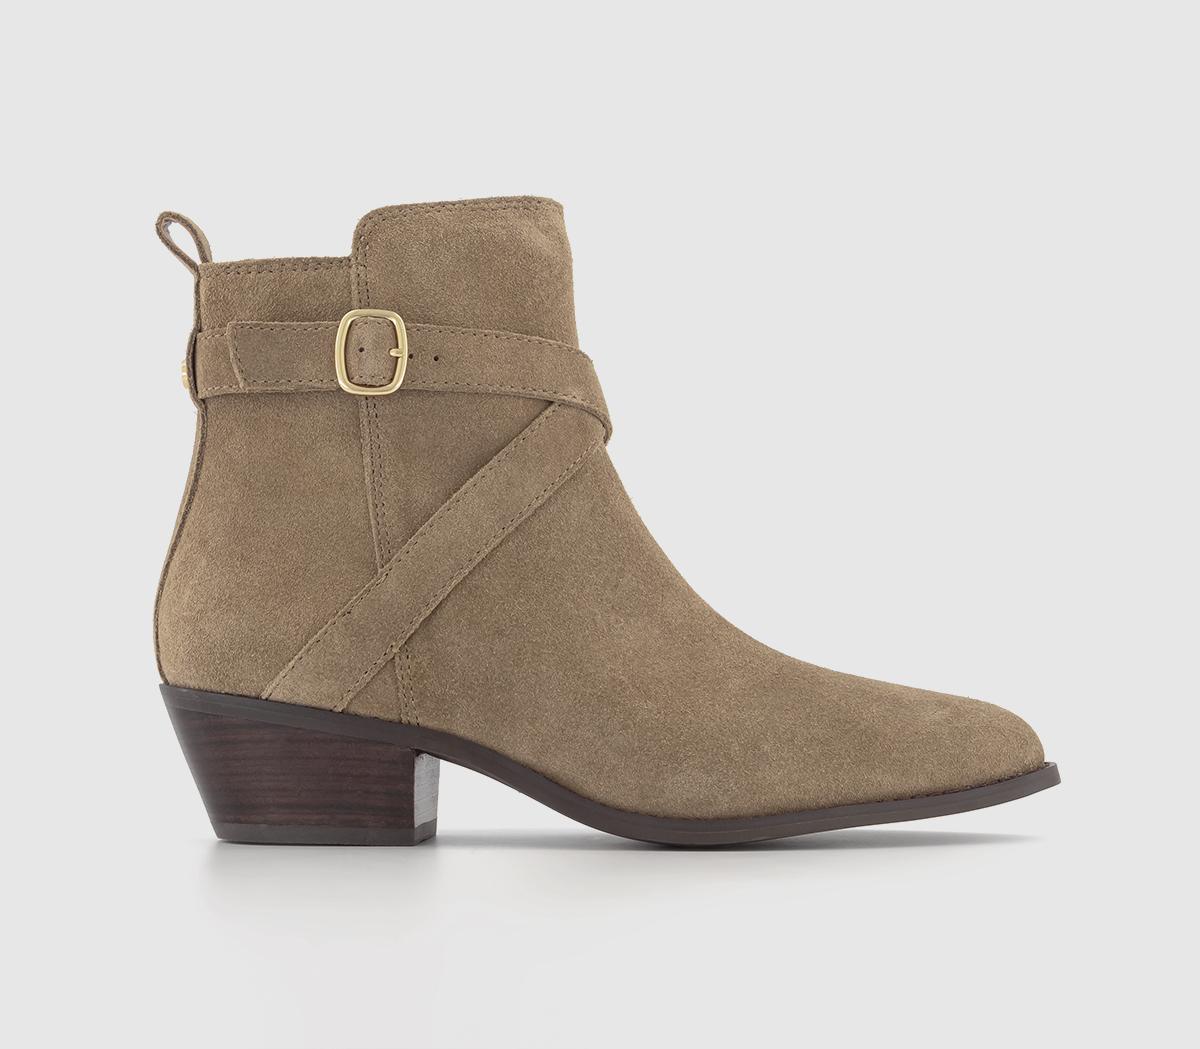 Arcade Strap Detail Pointed Toe Ankle Boots Taupe Suede Grey